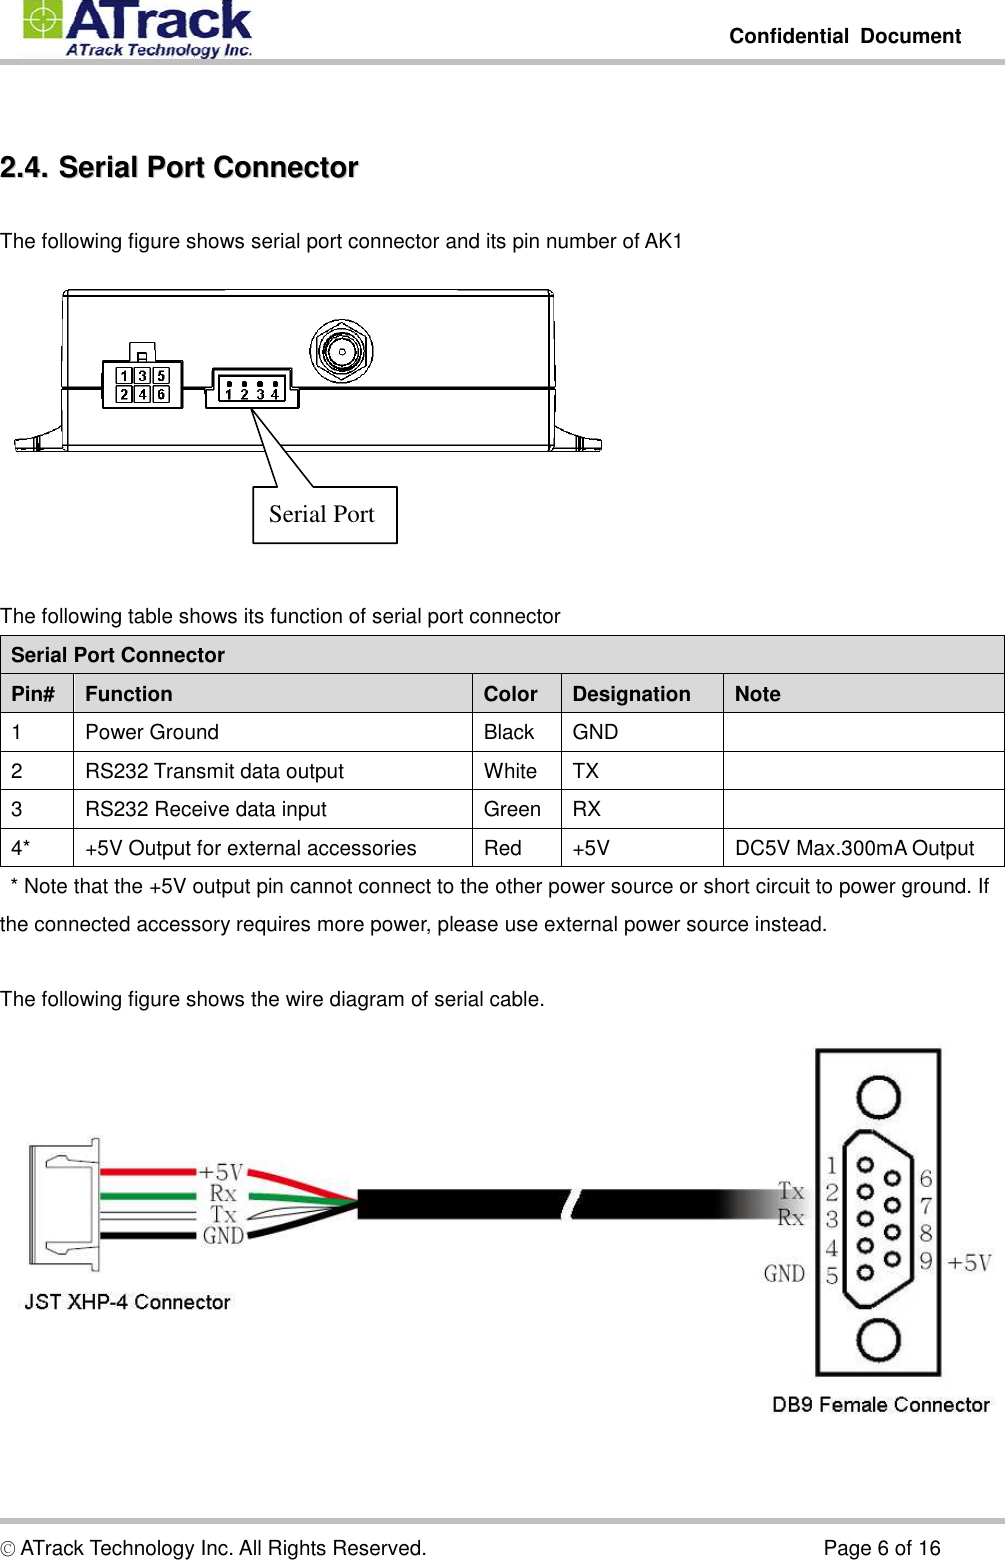         Confidential  Document  © ATrack Technology Inc. All Rights Reserved.                                                                            Page 6 of 16  22..44..  SSeerriiaall  PPoorrtt  CCoonnnneeccttoorr  The following figure shows serial port connector and its pin number of AK1     The following table shows its function of serial port connector Serial Port Connector Pin# Function  Color  Designation  Note 1  Power Ground  Black  GND   2  RS232 Transmit data output  White  TX   3  RS232 Receive data input  Green  RX   4*  +5V Output for external accessories  Red  +5V  DC5V Max.300mA Output   * Note that the +5V output pin cannot connect to the other power source or short circuit to power ground. If the connected accessory requires more power, please use external power source instead.  The following figure shows the wire diagram of serial cable.  Serial Port 